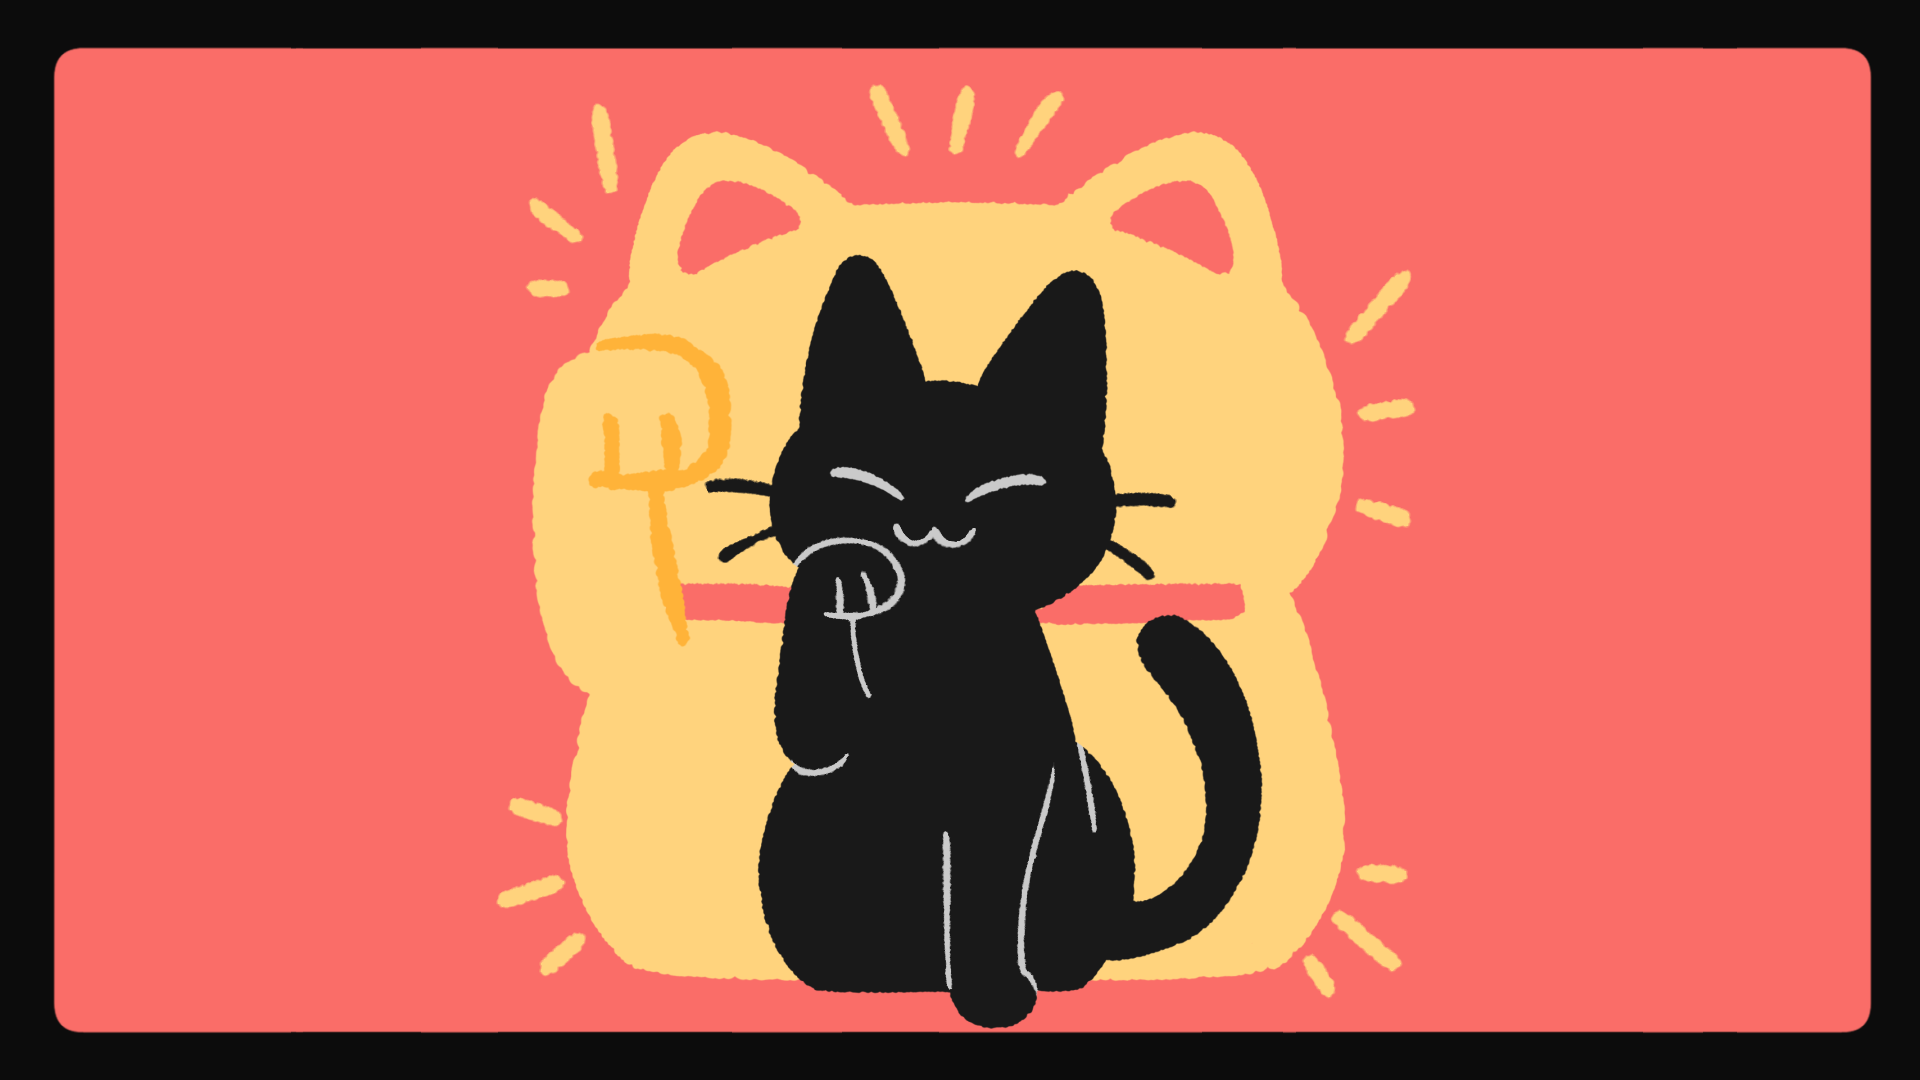 Icon for Fat Cat